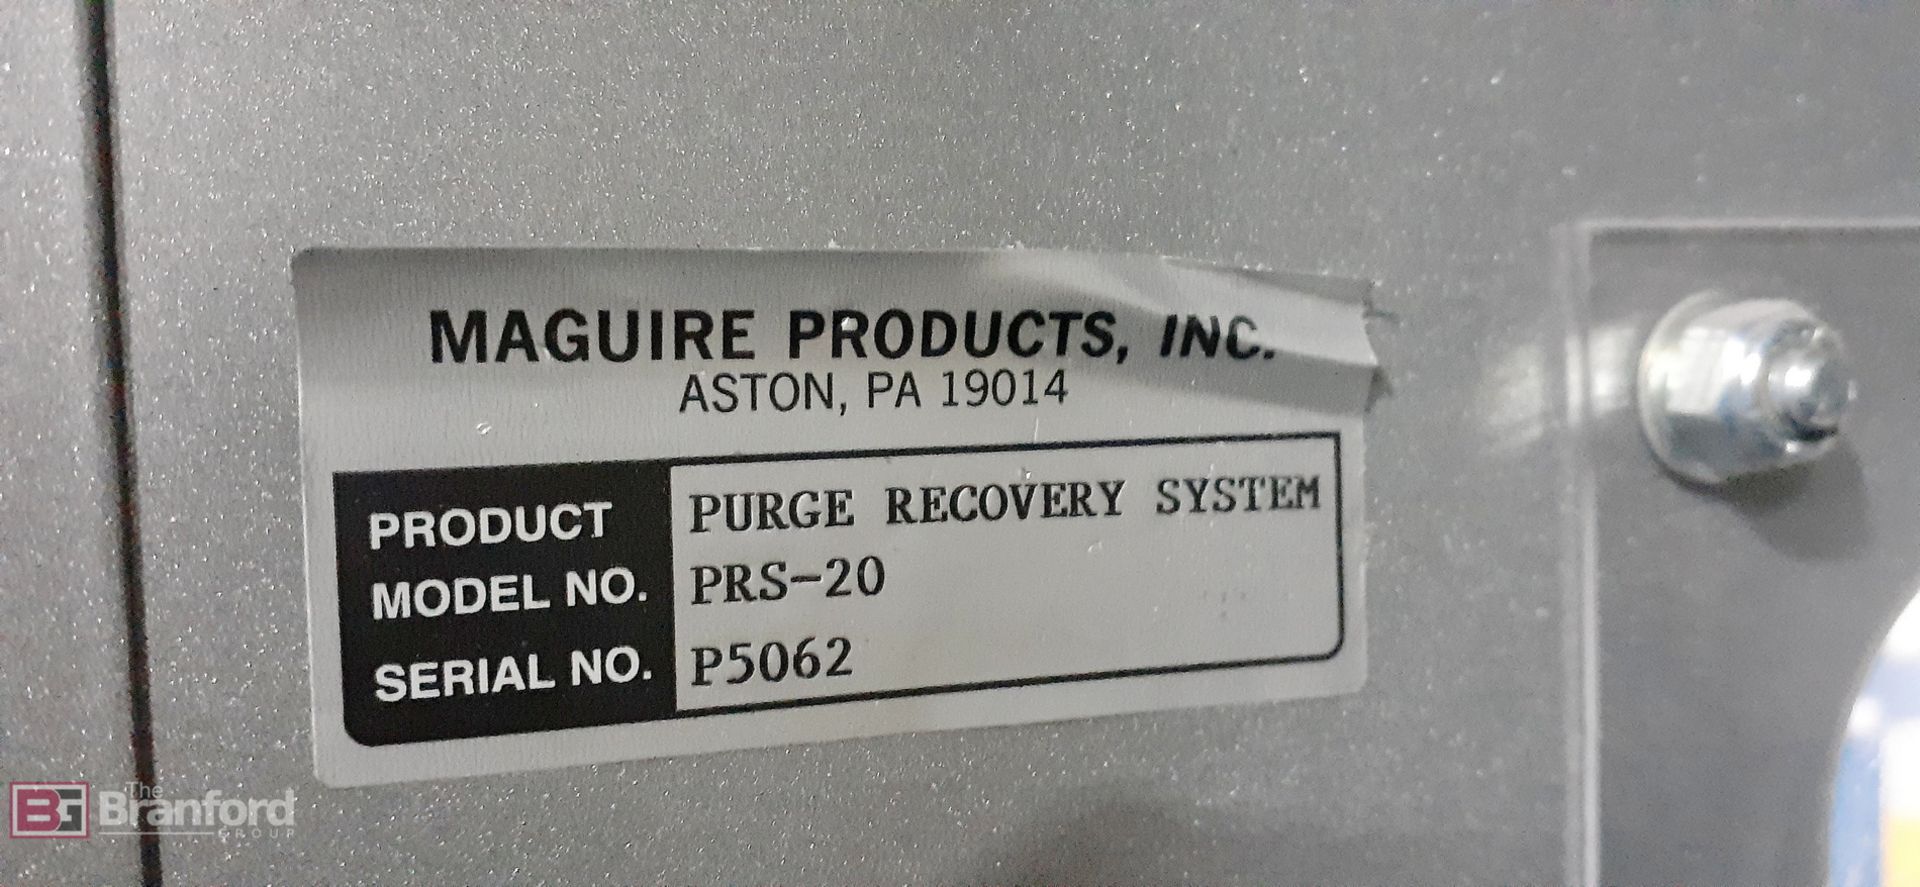 Maguire Model PRS20, Plastic Shuttle Granulator (Purge Recovery System) - Image 8 of 8